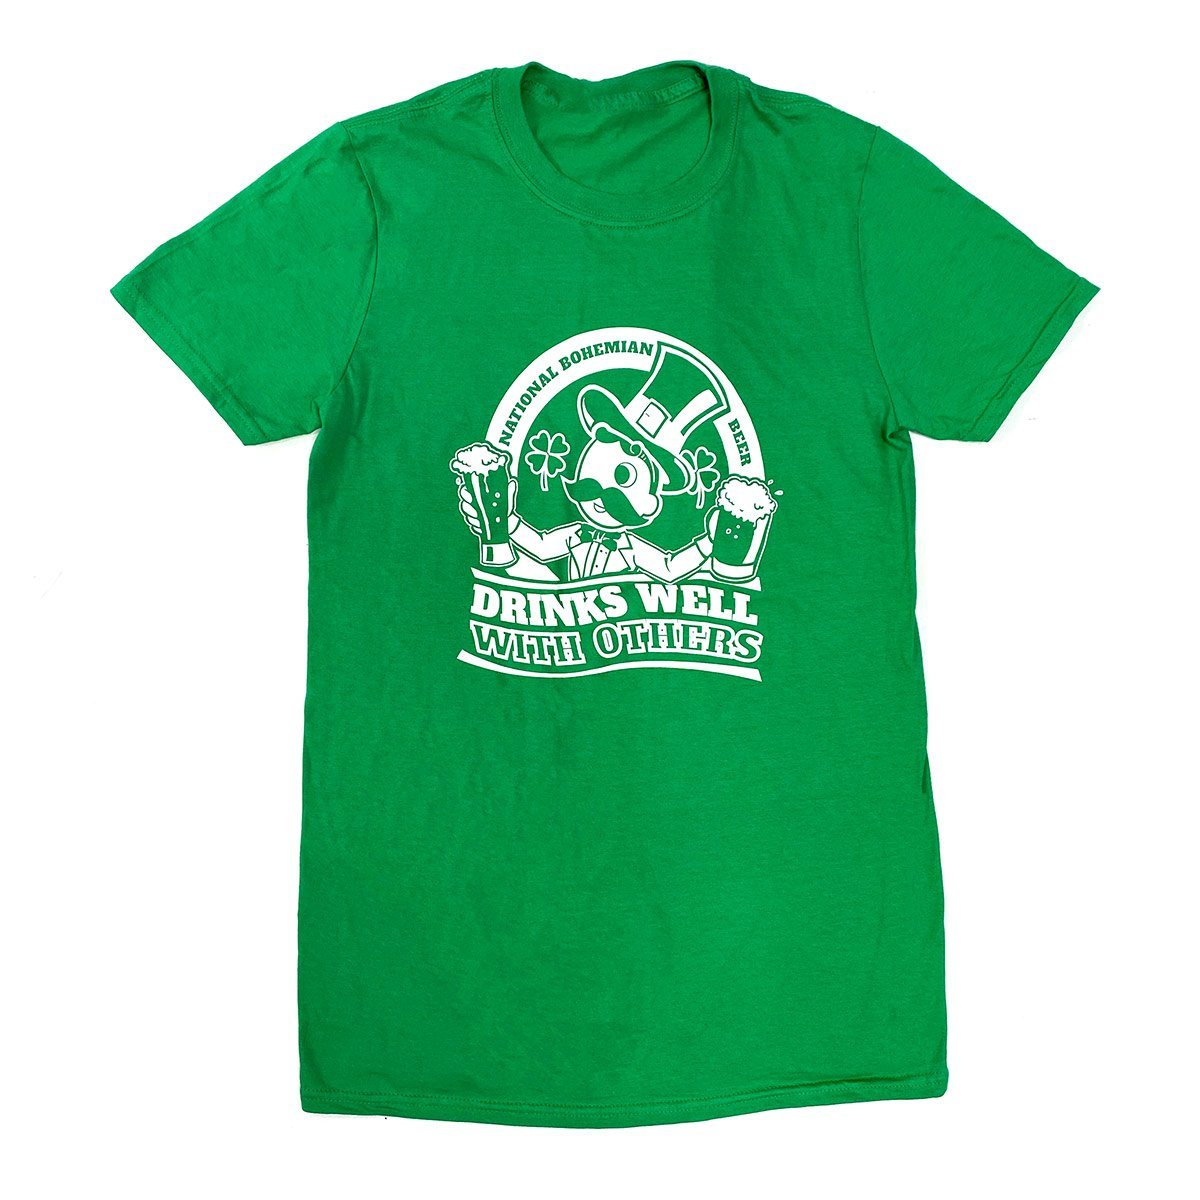 Drinks Well with Others - Natty Boh (Irish Green) / Shirt - Route One ...